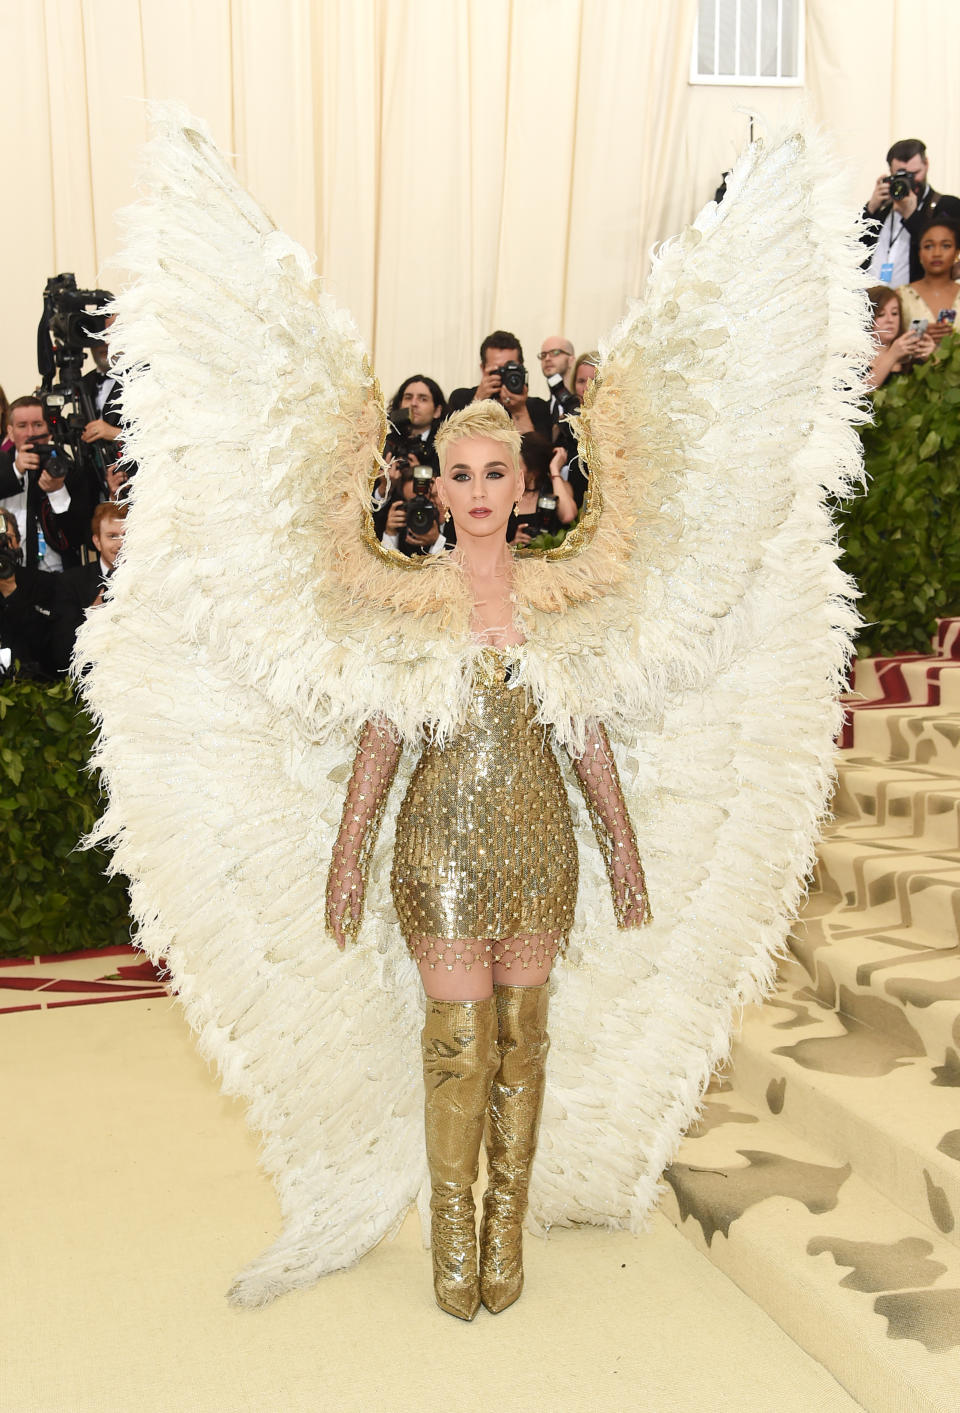 <p>We already knew that subtlety isn’t Katy Perry’s forte, but she went ahead and reminded us anyway at the Met Gala wearing a gold Versace mini dress and enormous angel wings. [Photo: Getty] </p>